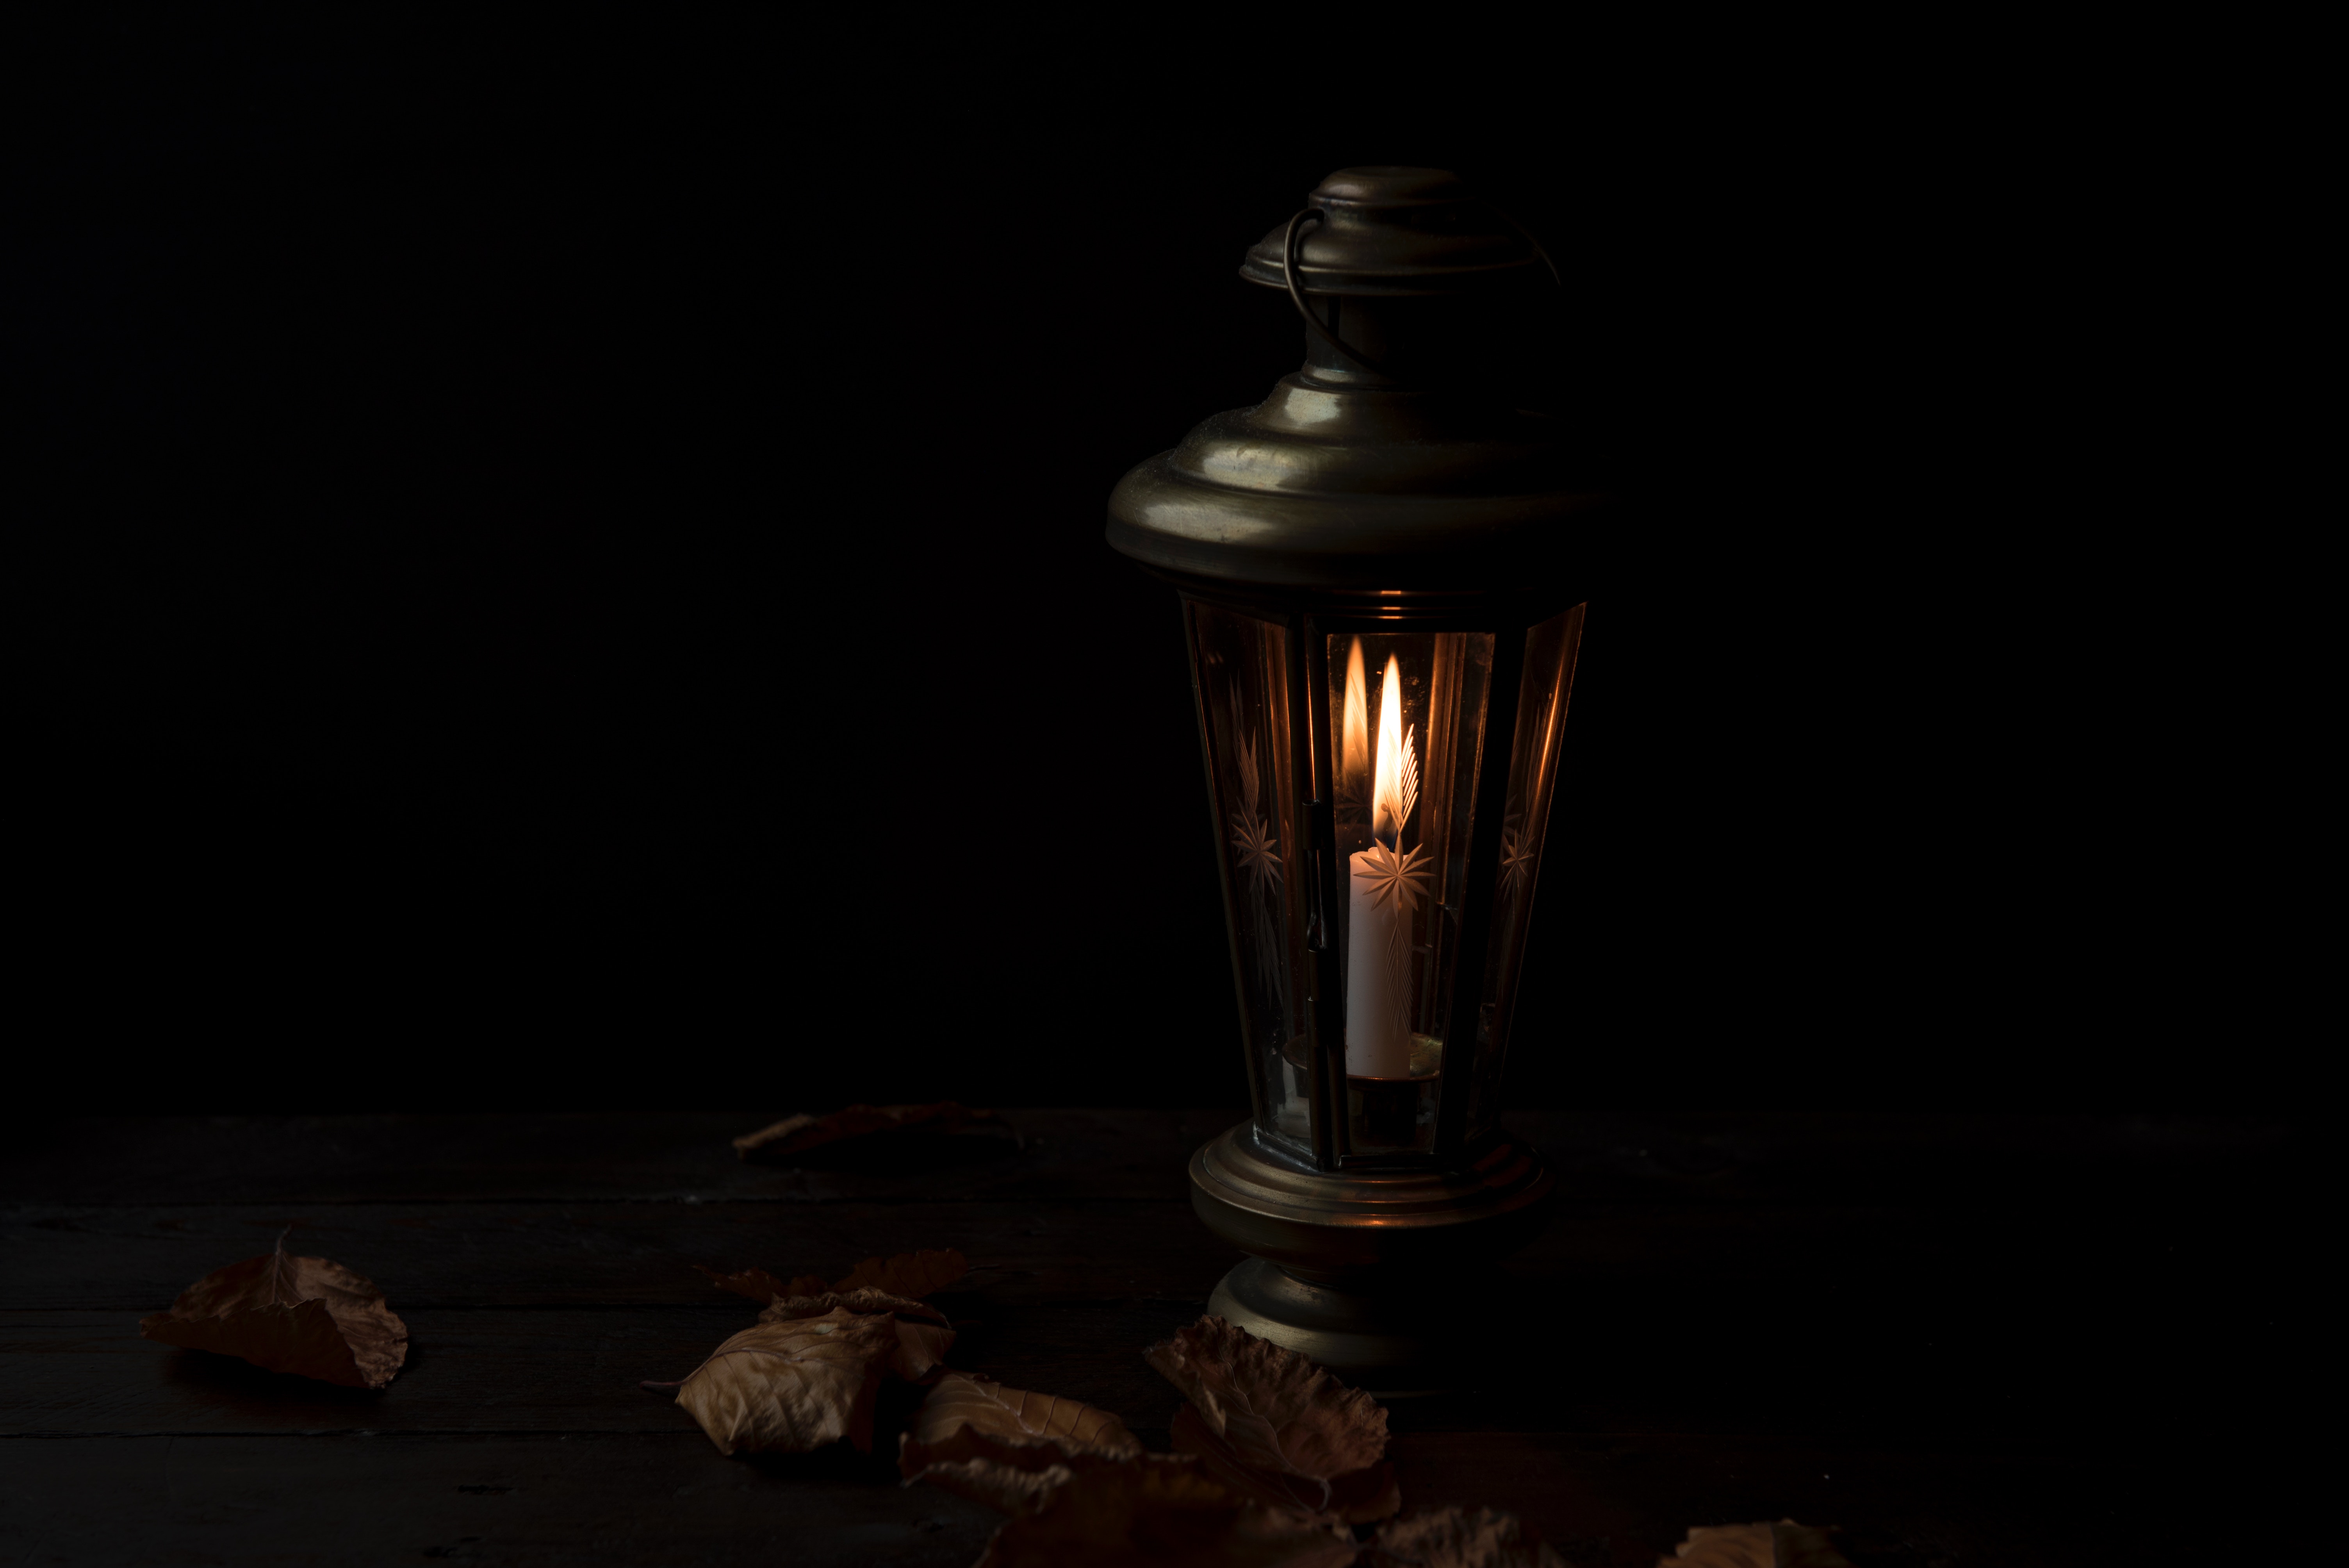 night, candle, dark, lamp wallpaper for mobile